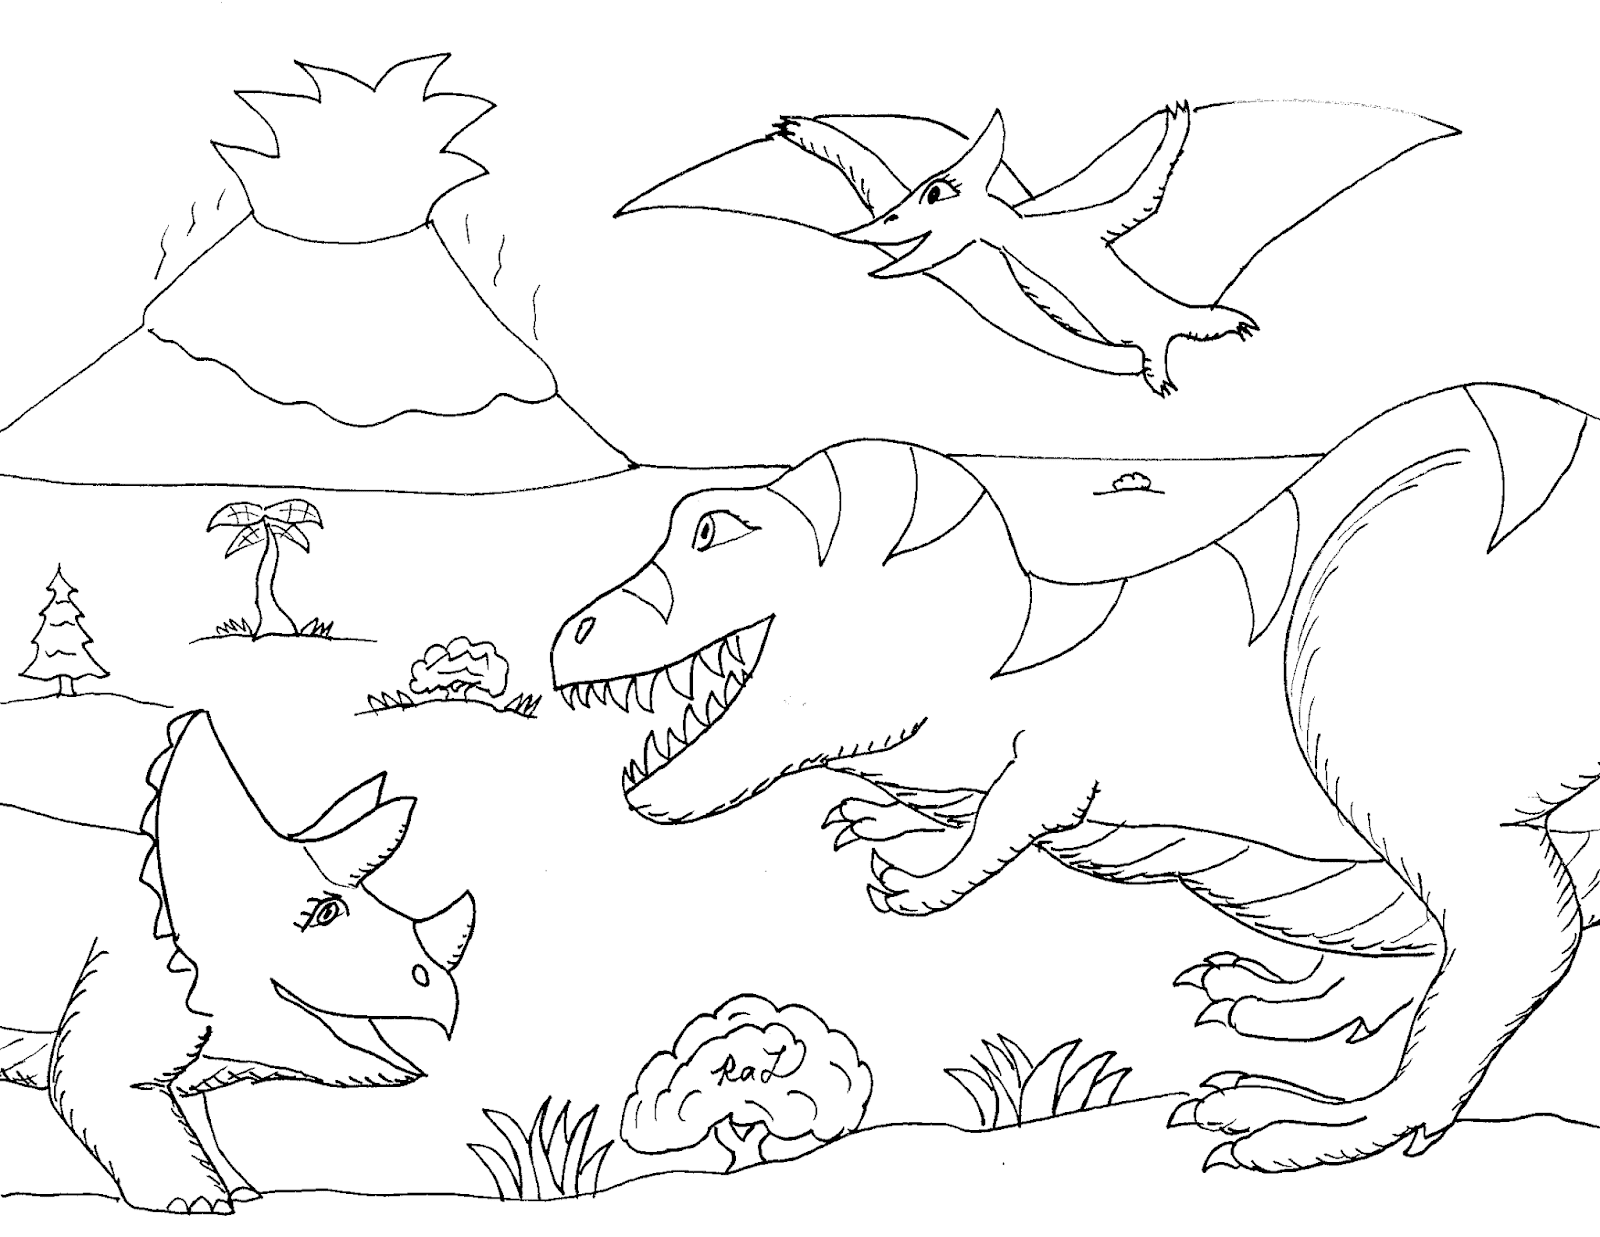 Robin's Great Coloring Pages: Pteranodon Chick on a Ledge and other ...